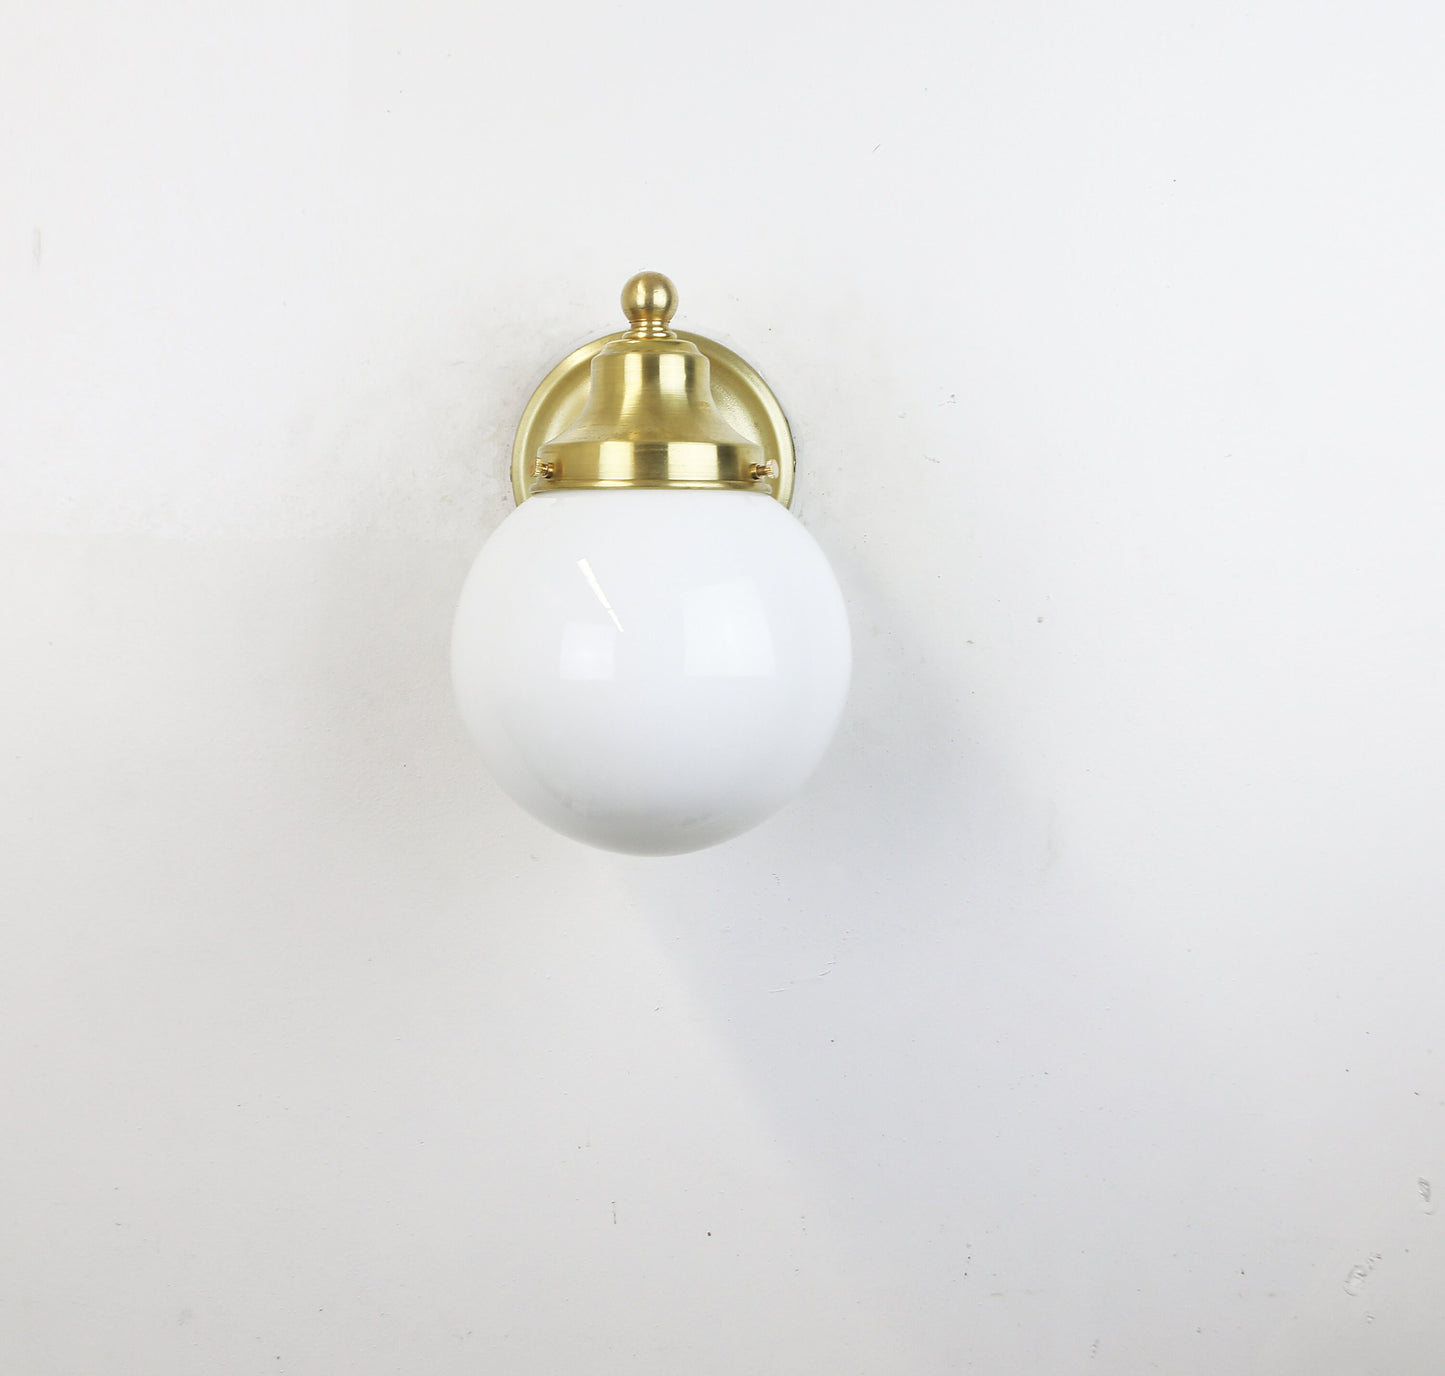 Casting Canopy Wall sconce Light, Classic Wall Sconce Light, American Made Shade